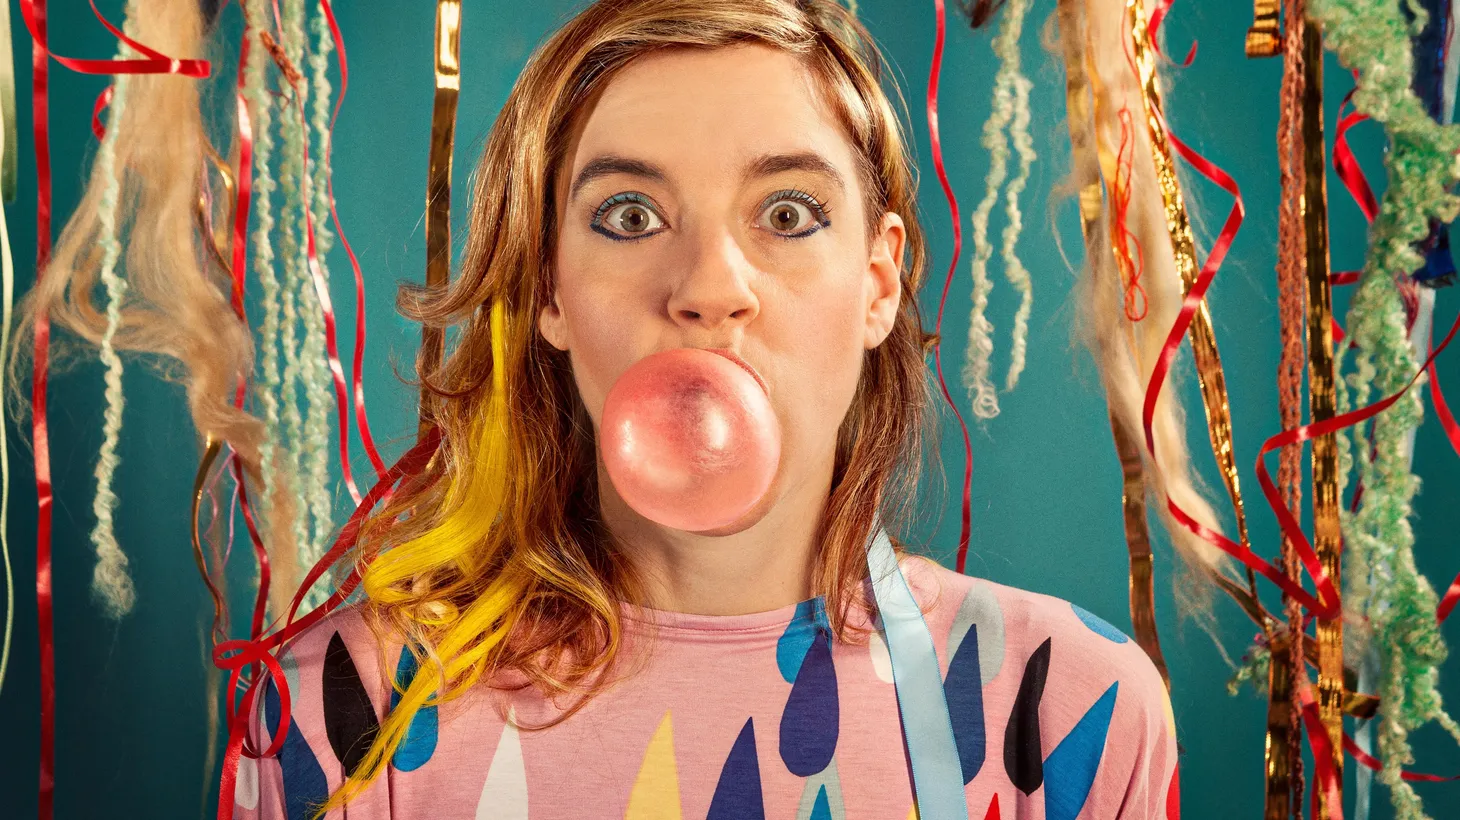 Merrill Garbus is an imaginative and whimsical artist best known as Tune-Yards. She delights with each new recording and her latest is no exception.